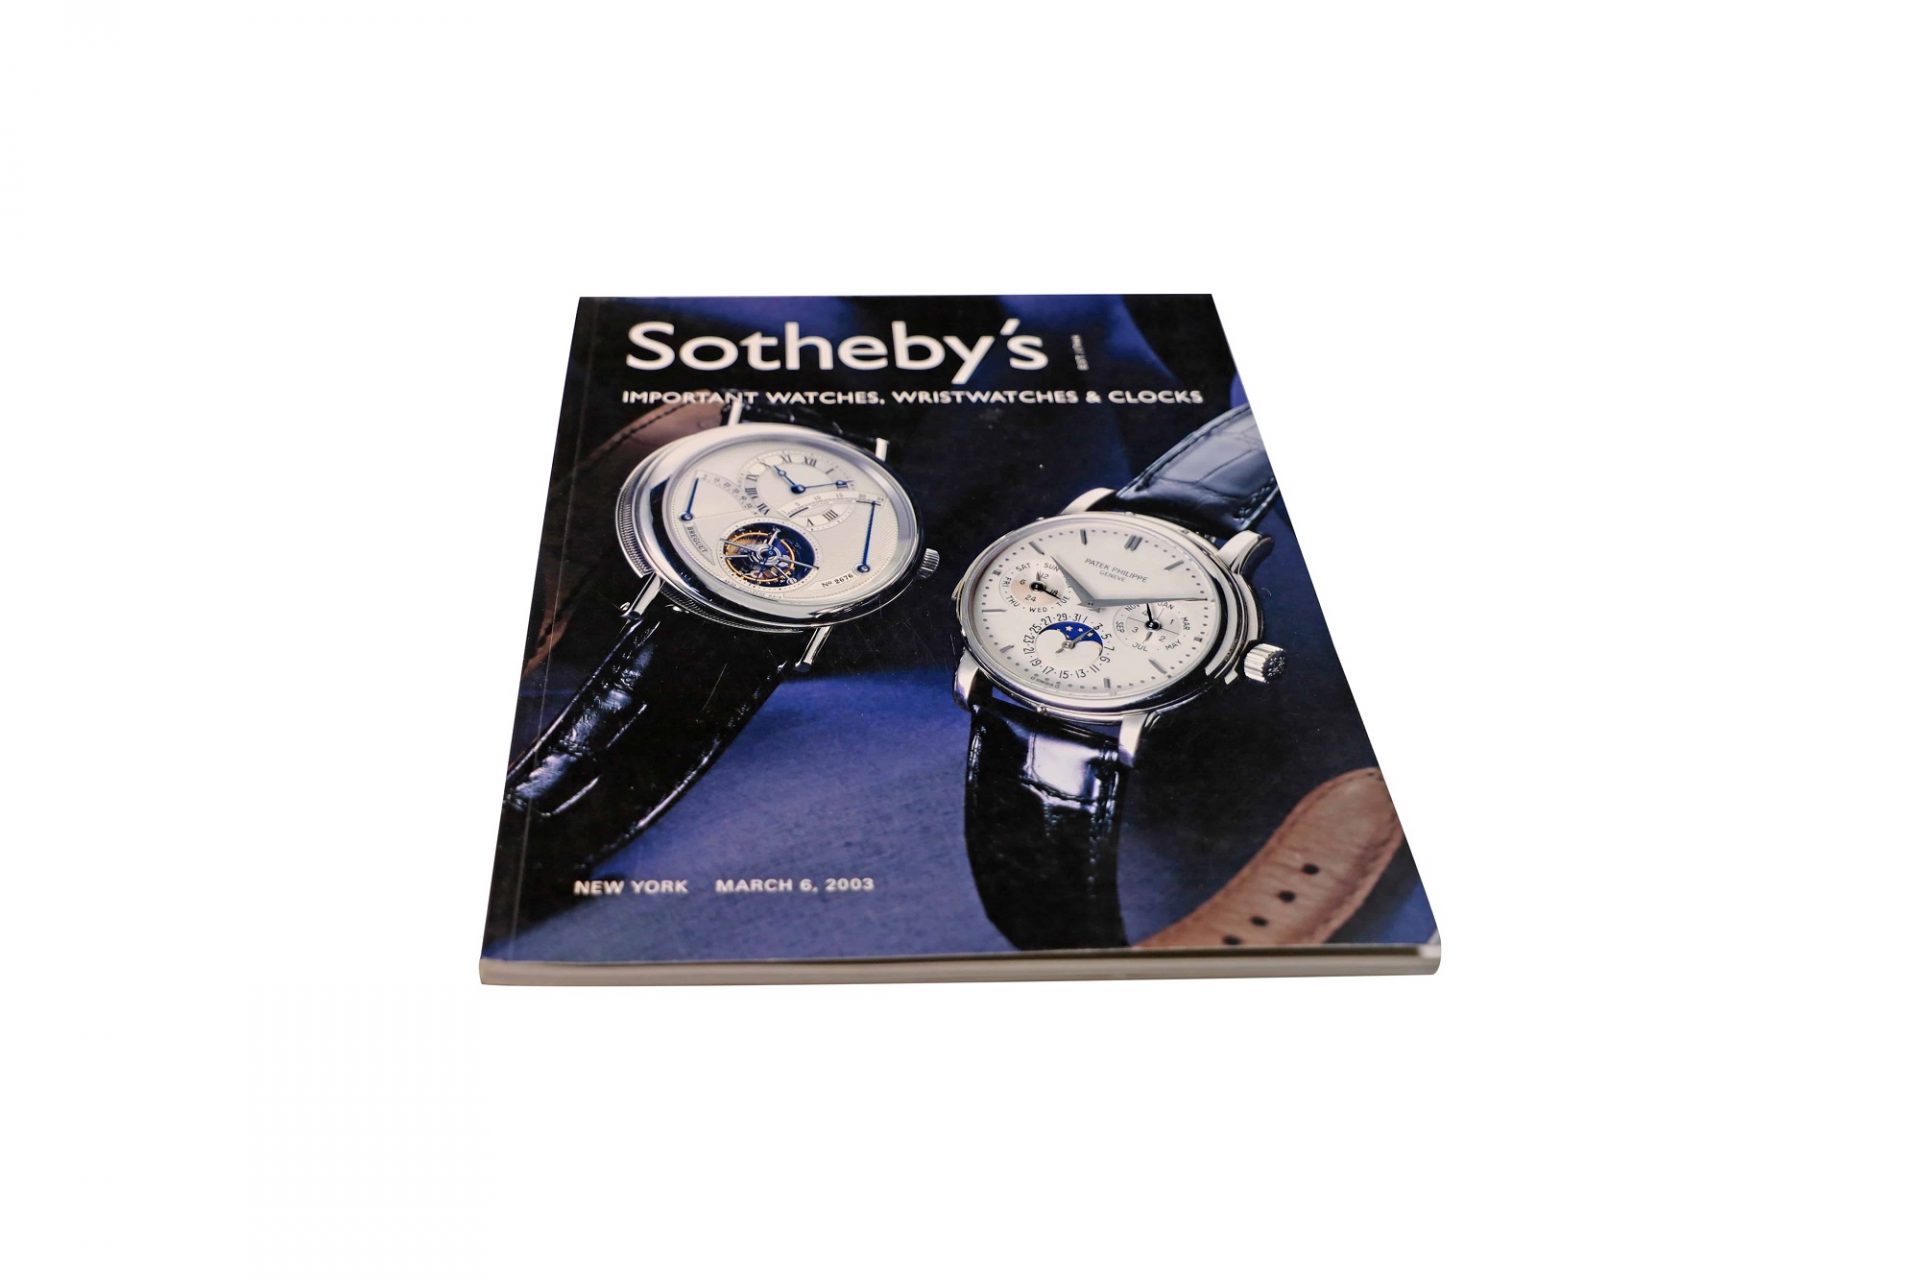 Sotheby's Important Watch, Wristwatch And Clock New York March 6, 2003 Auction Catalog - Rare Watch Parts